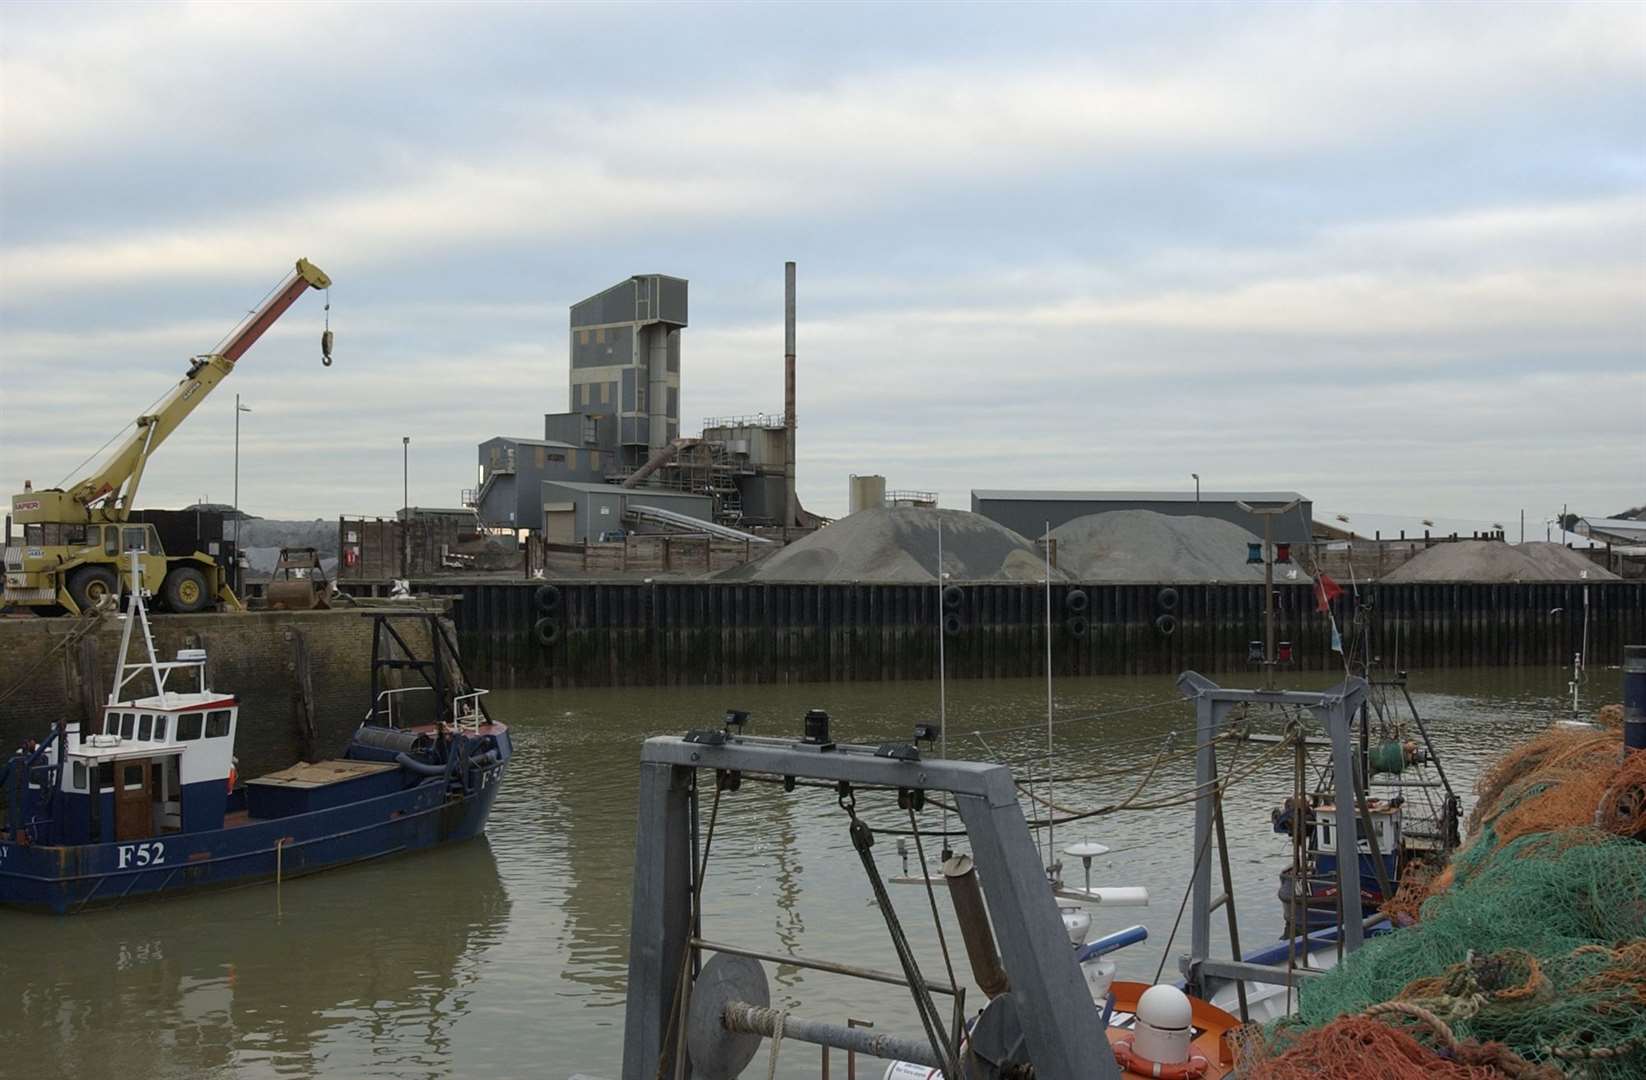 Emergency services were called to Brett Aggregates at Whitstable Harbour